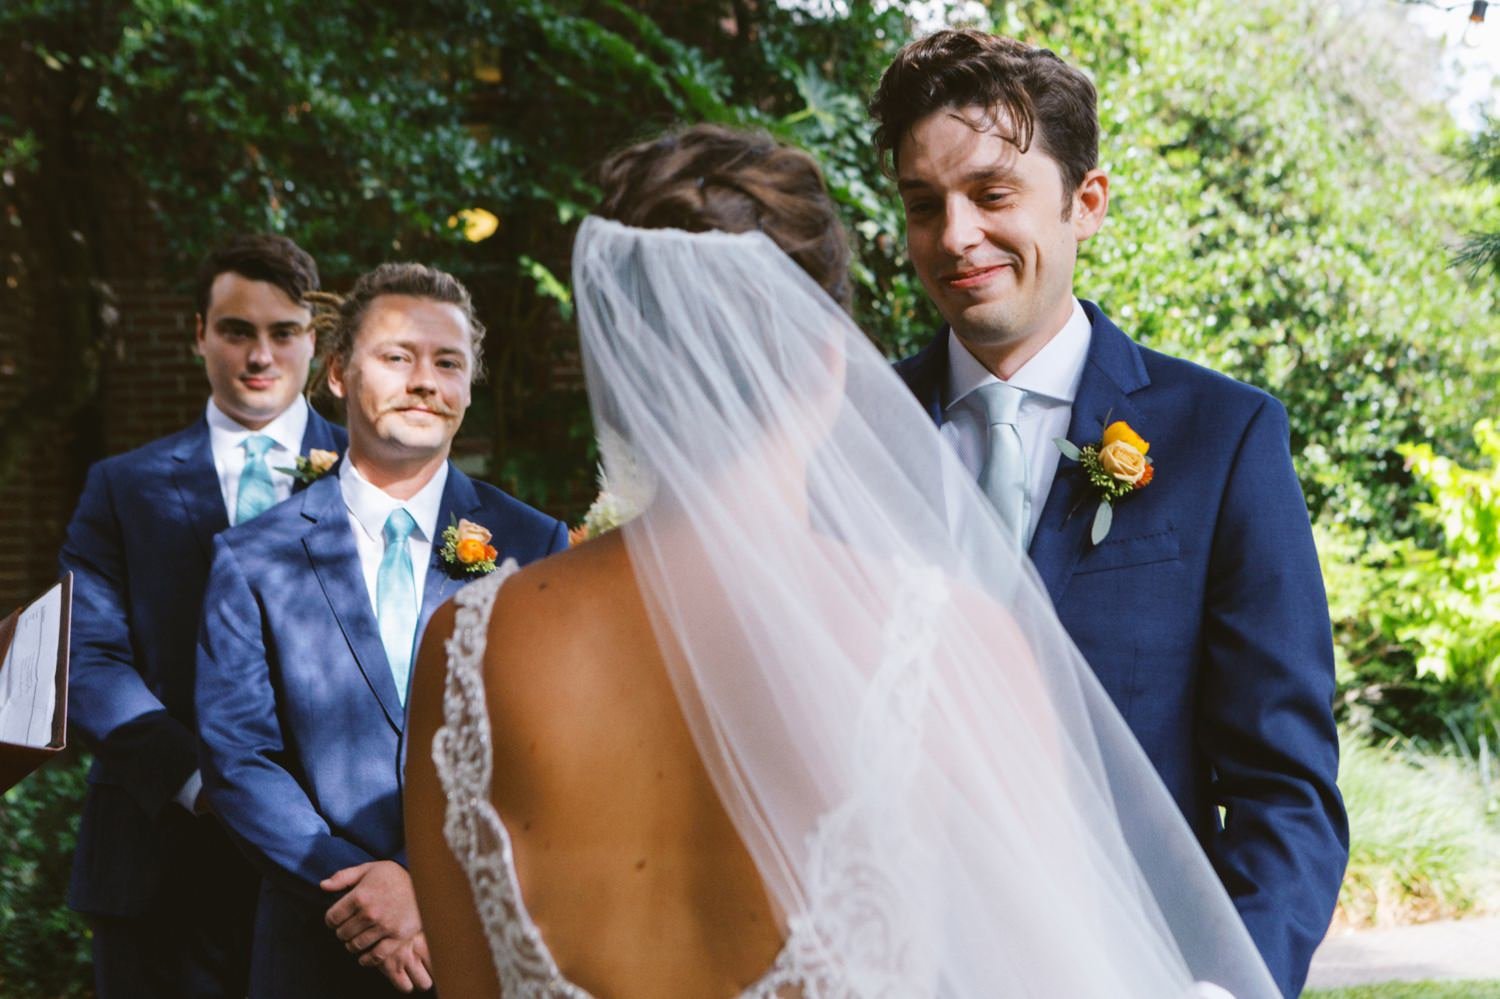  groom in blue suit smiles at bride in white dress and veil 